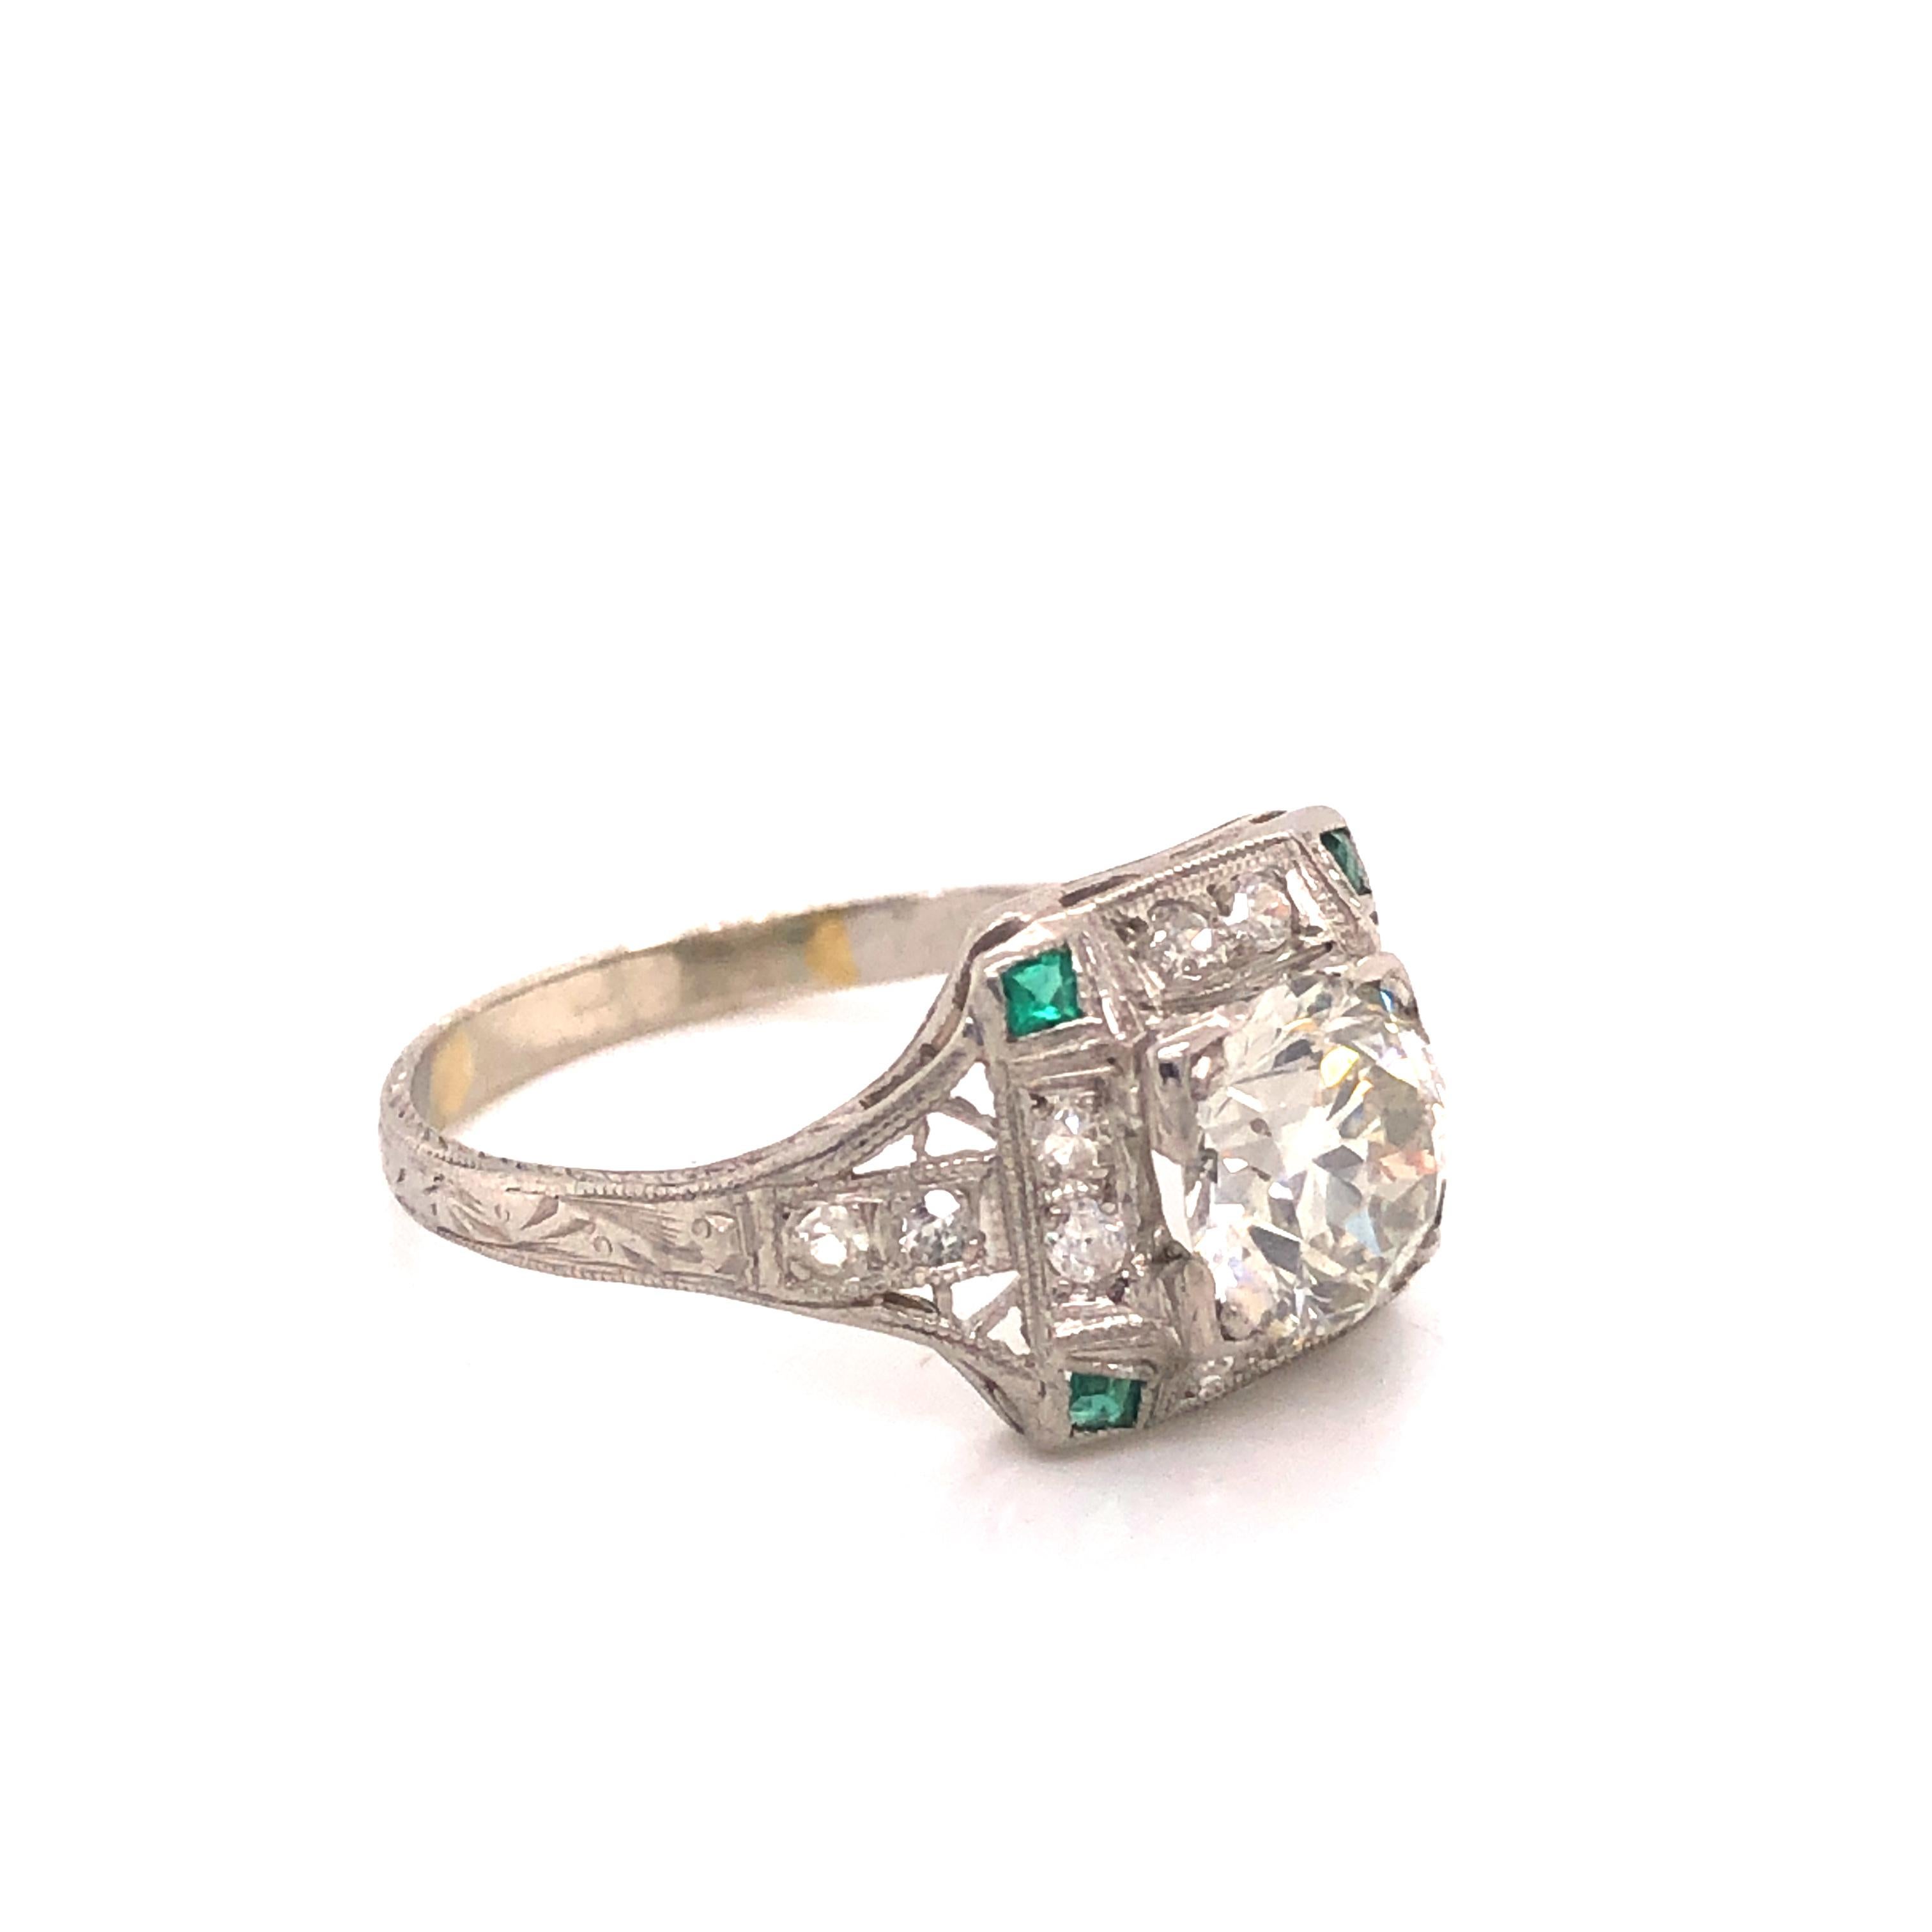 Gorgeous ring from the Art Deco time period. This ring has details throughout as it truly is as beautiful as the day it was created. The ring is highlighted with one earth mined natural round diamond with an old mine cut. The center diamond is the